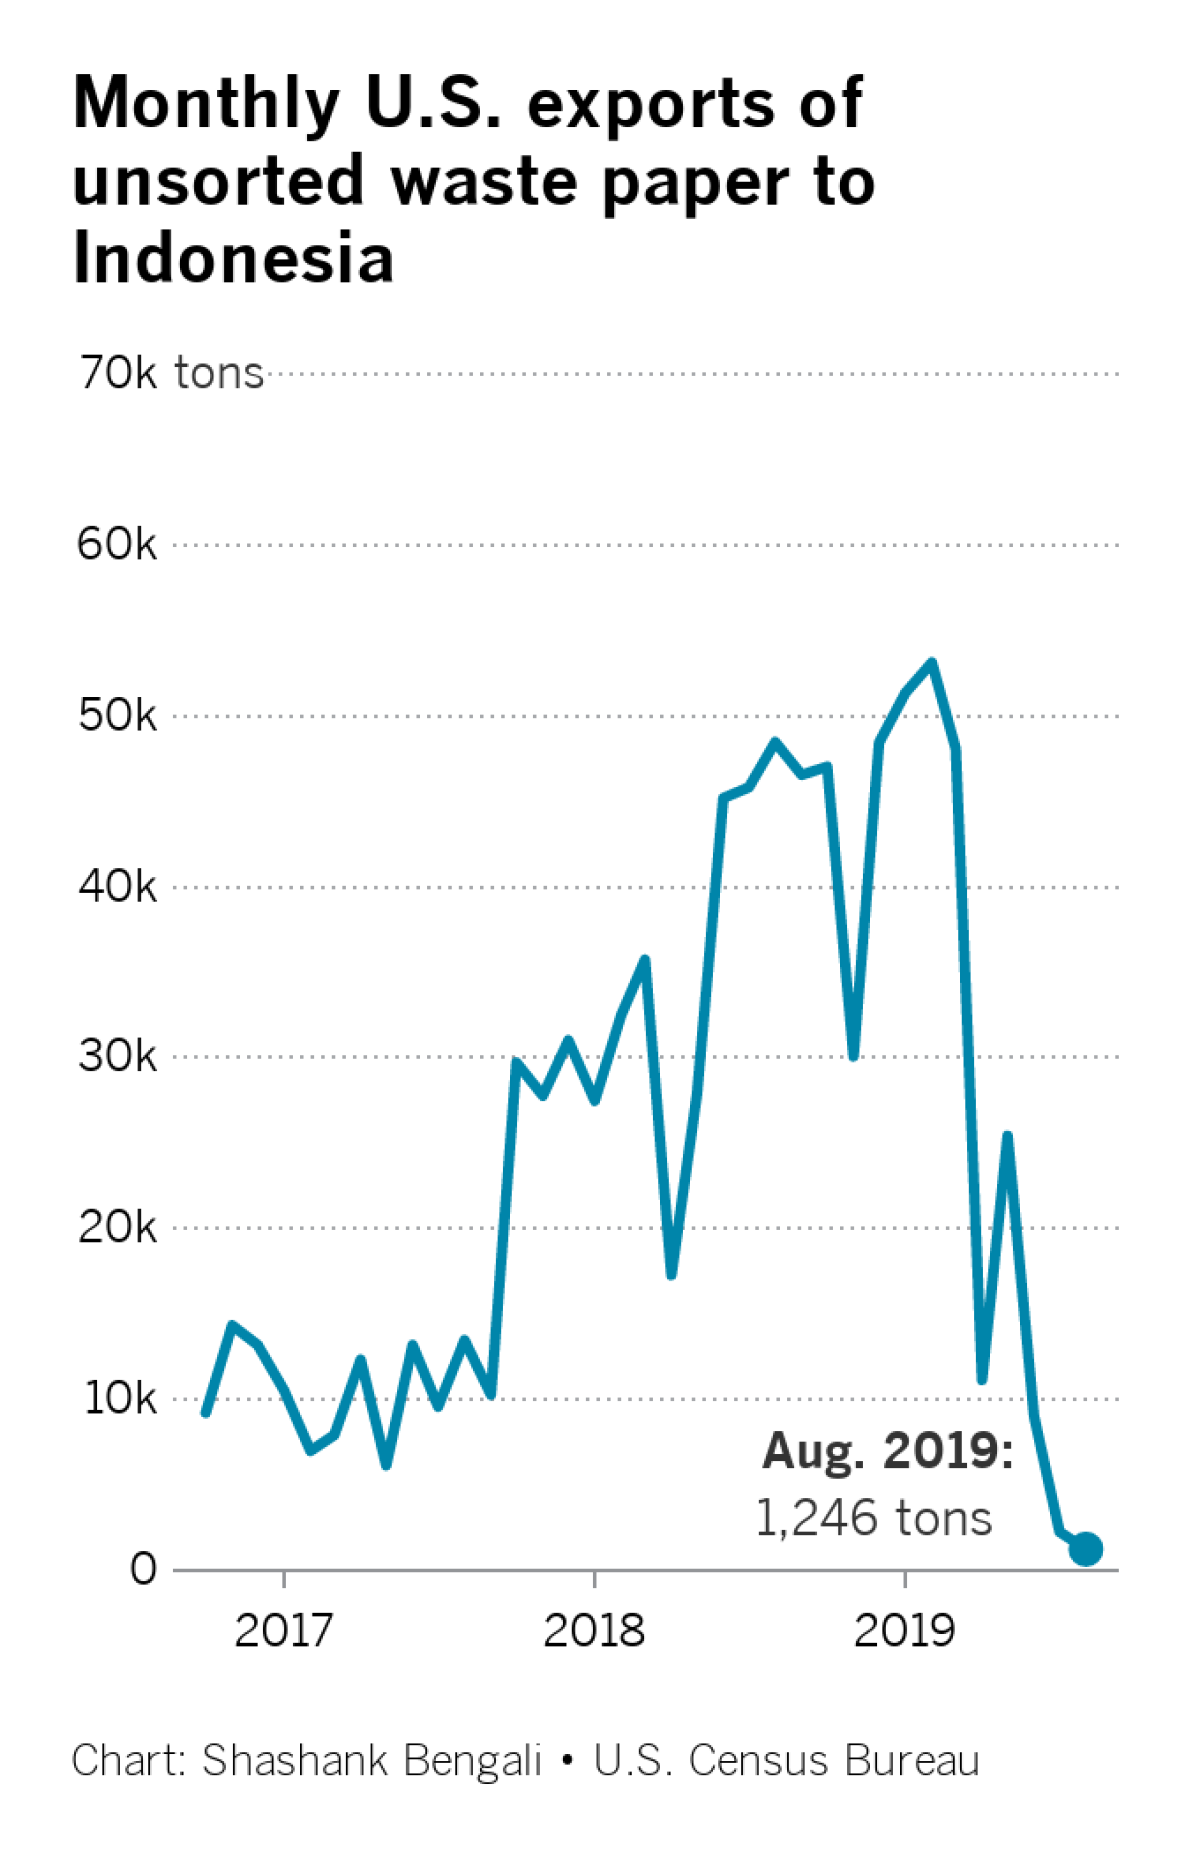 Chart shows monthly U.S. exports of unsorted waste paper to Indonesia